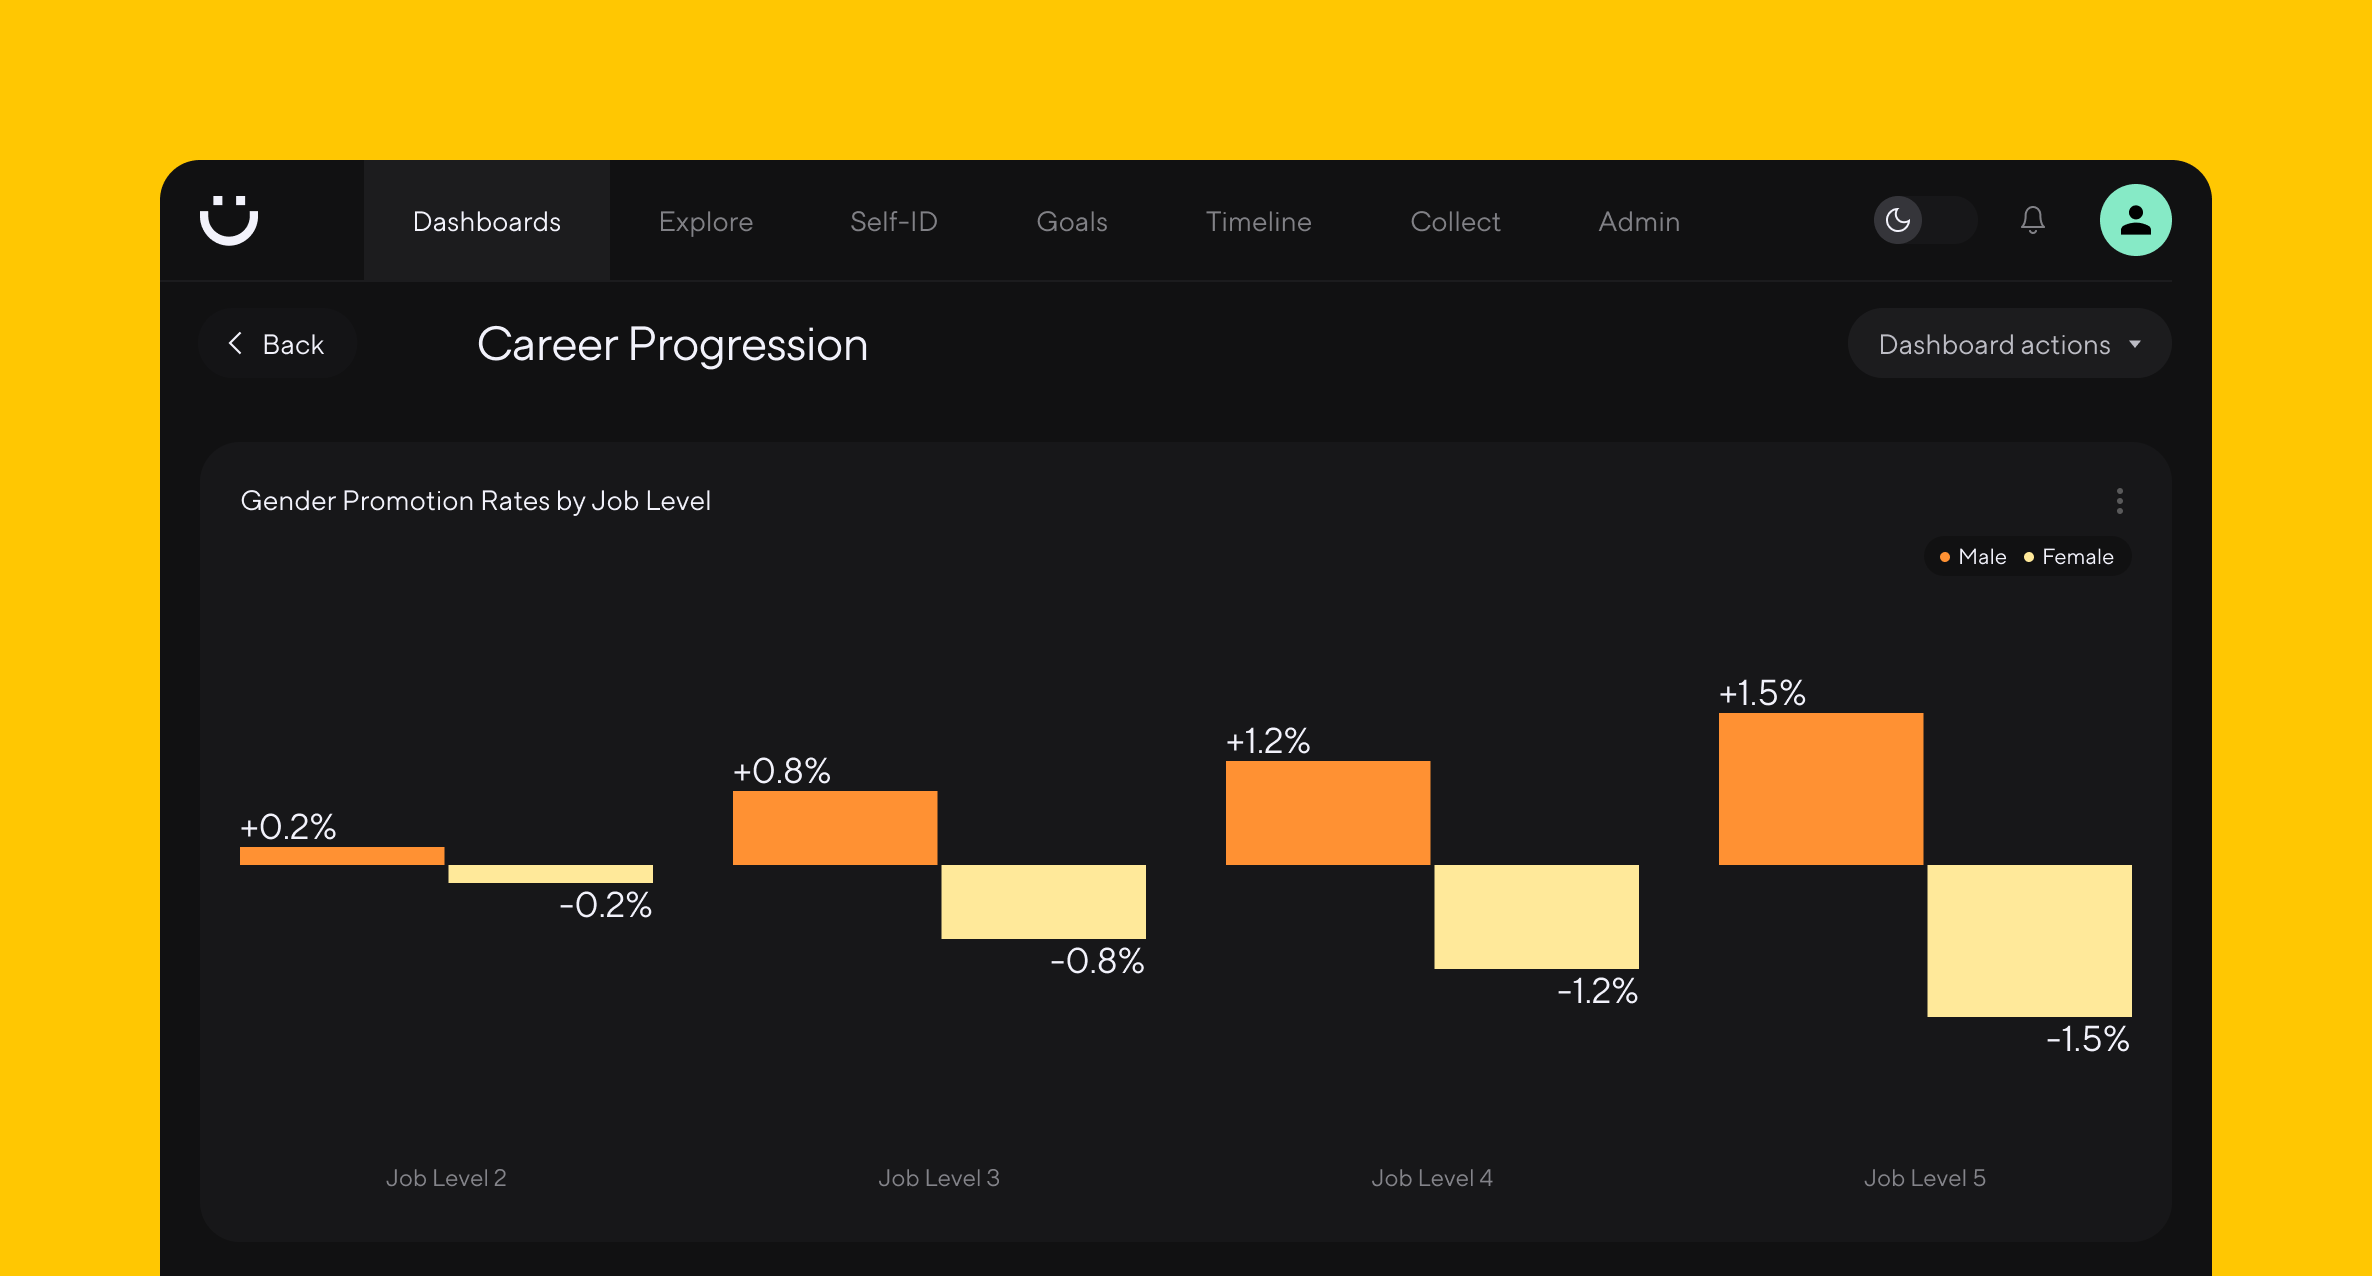 A dashboard showing a graph comparing male and female promotion rates across job levels